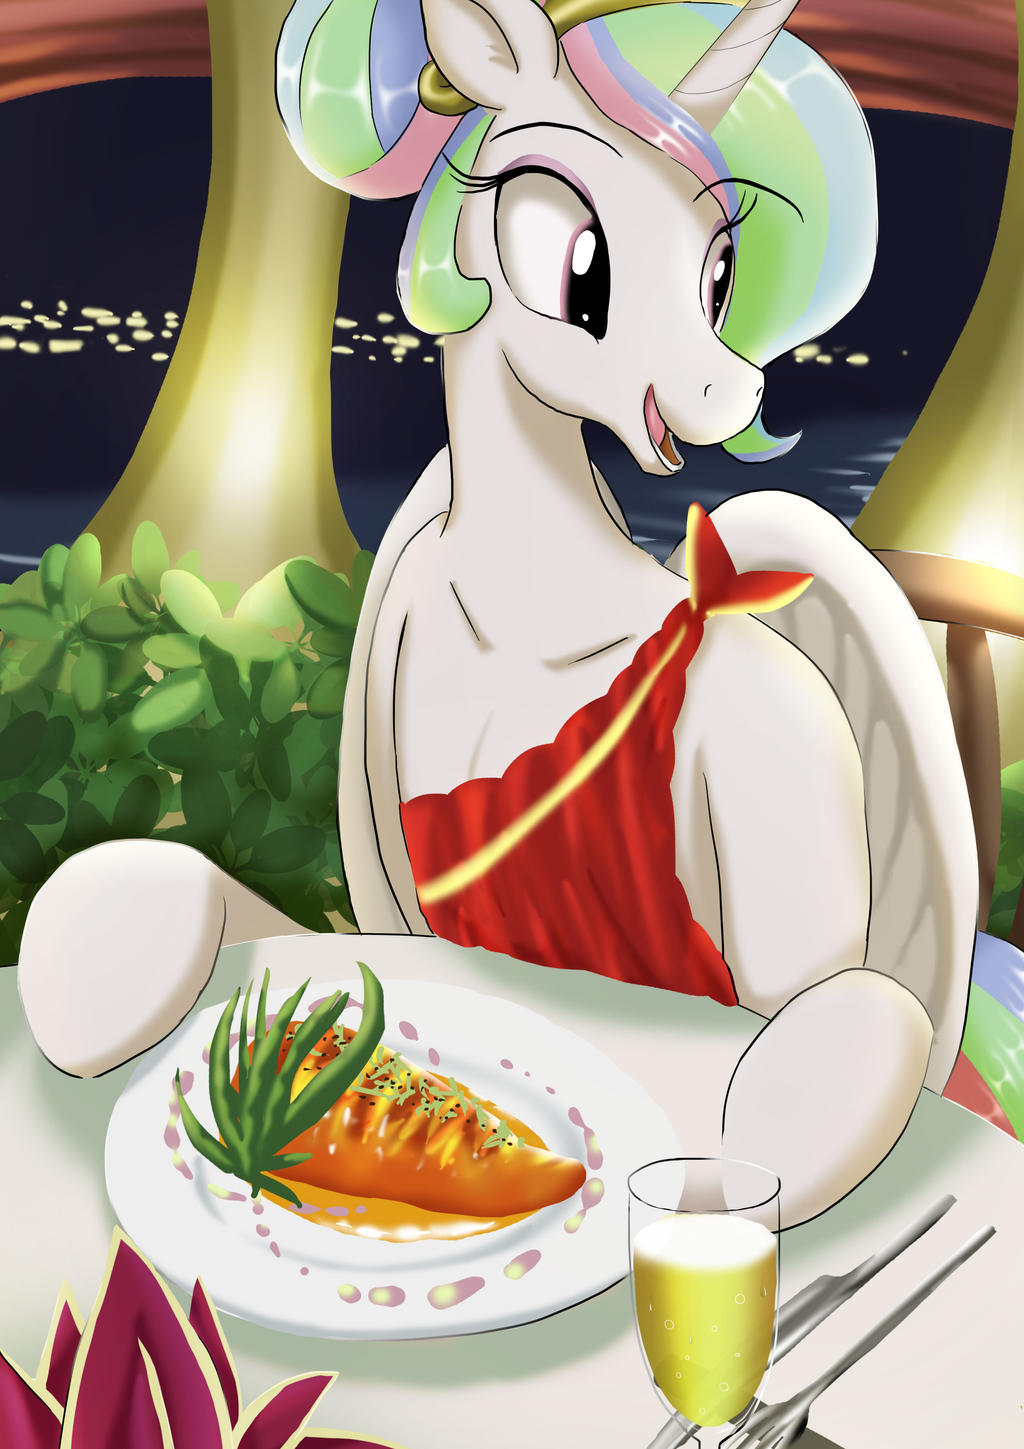 carrot_steak_and_apple_cider_by_neo_shre